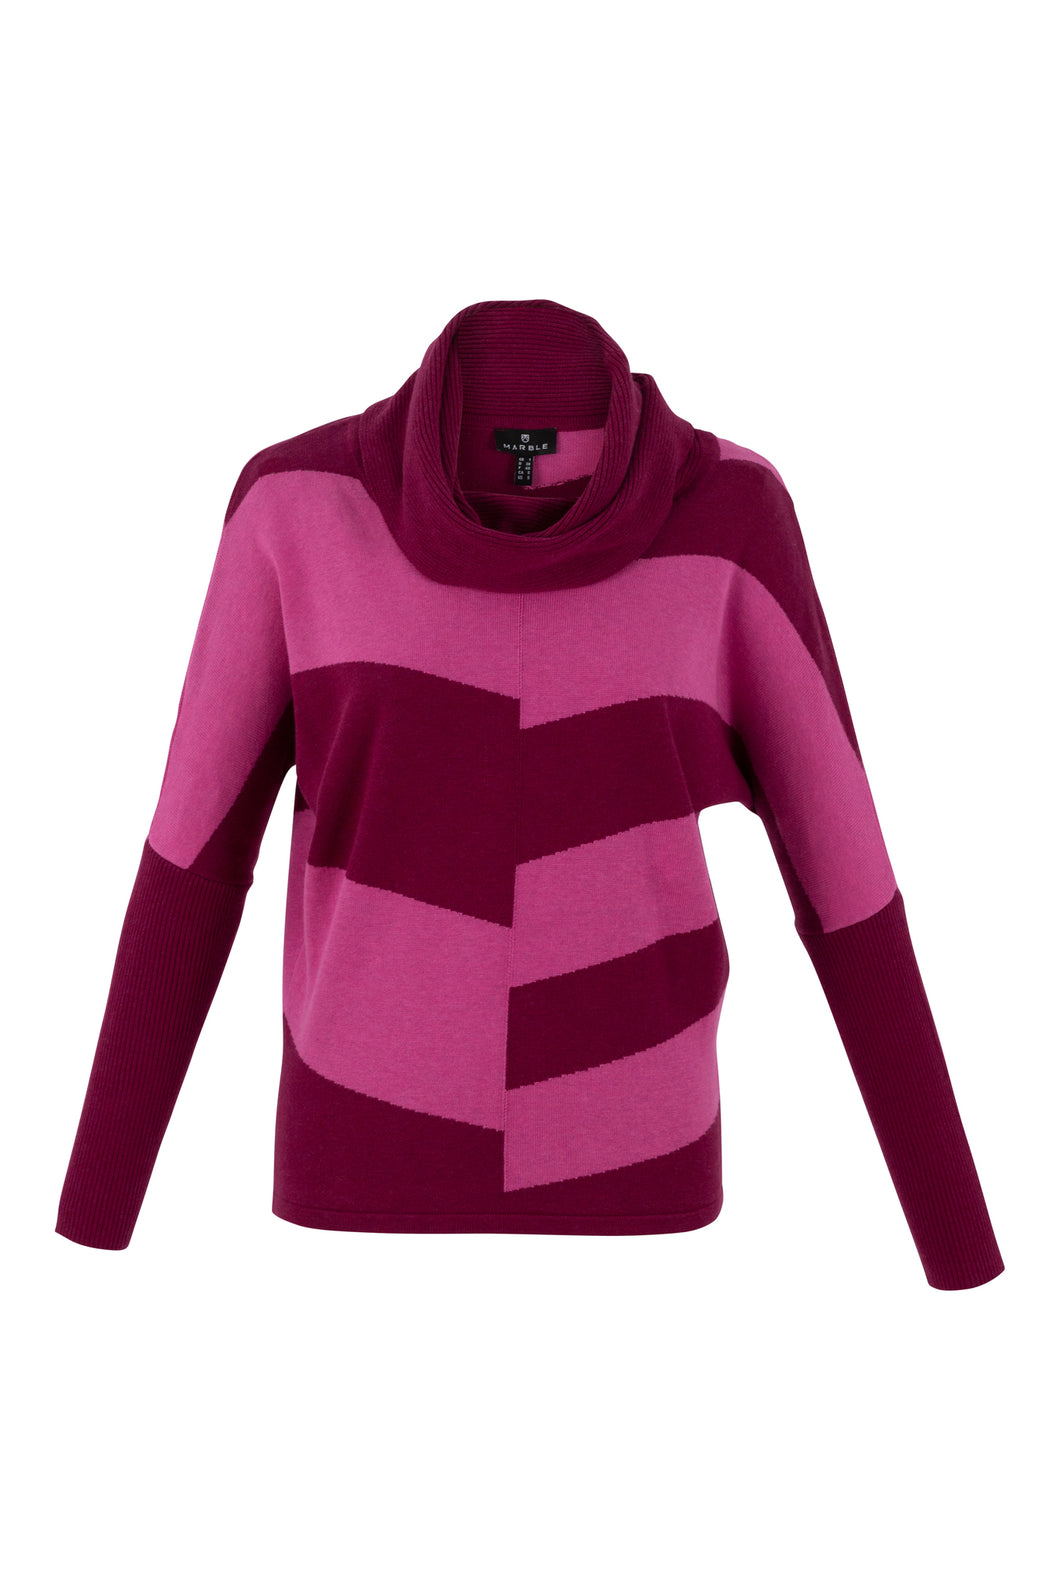 MARBLE FASHIONS 7204 SWEATER COLOUR 205 - BERRY